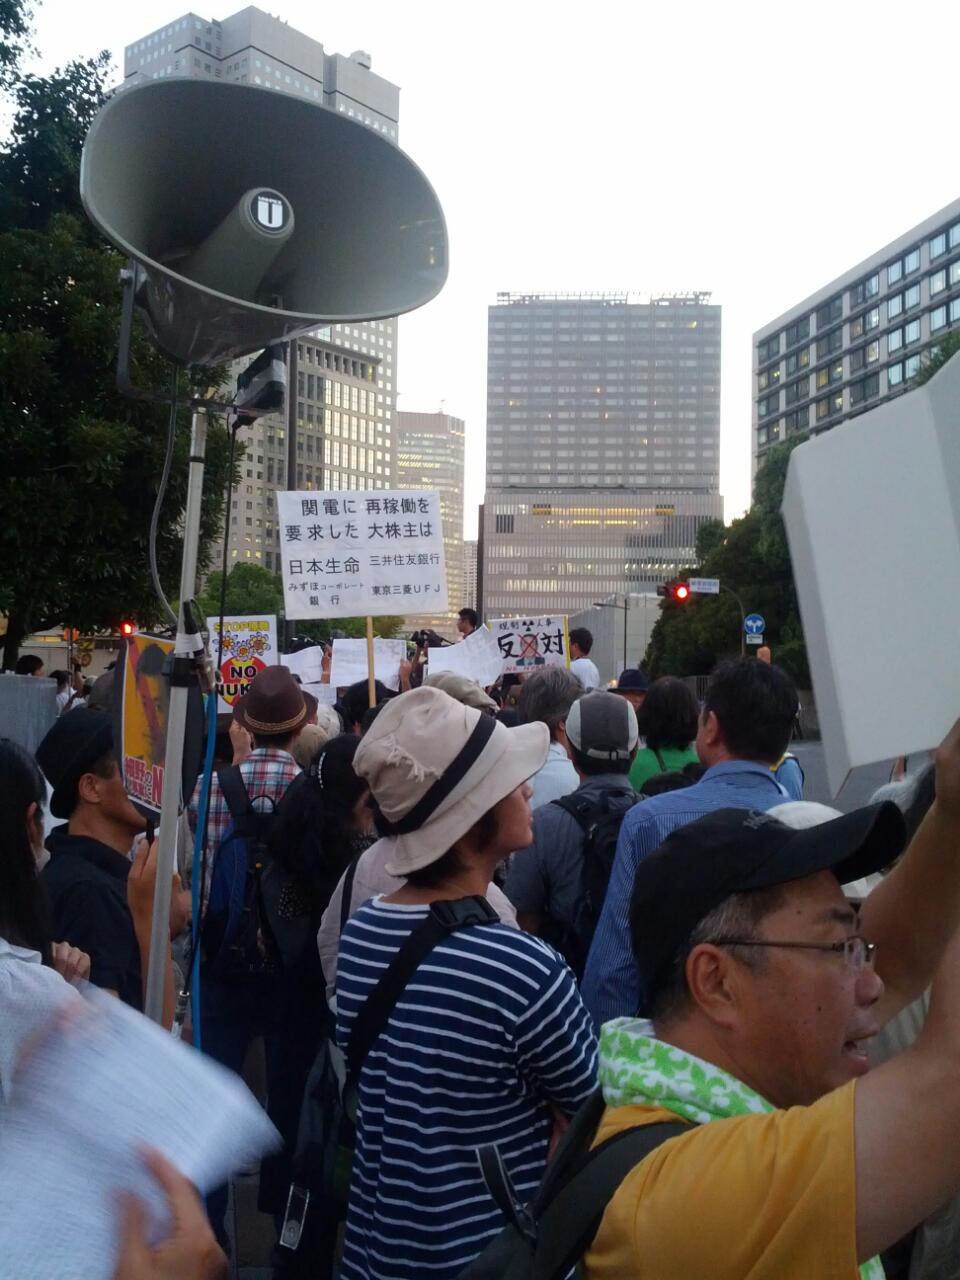 protesters are standing with their laptops in the middle of an urban street